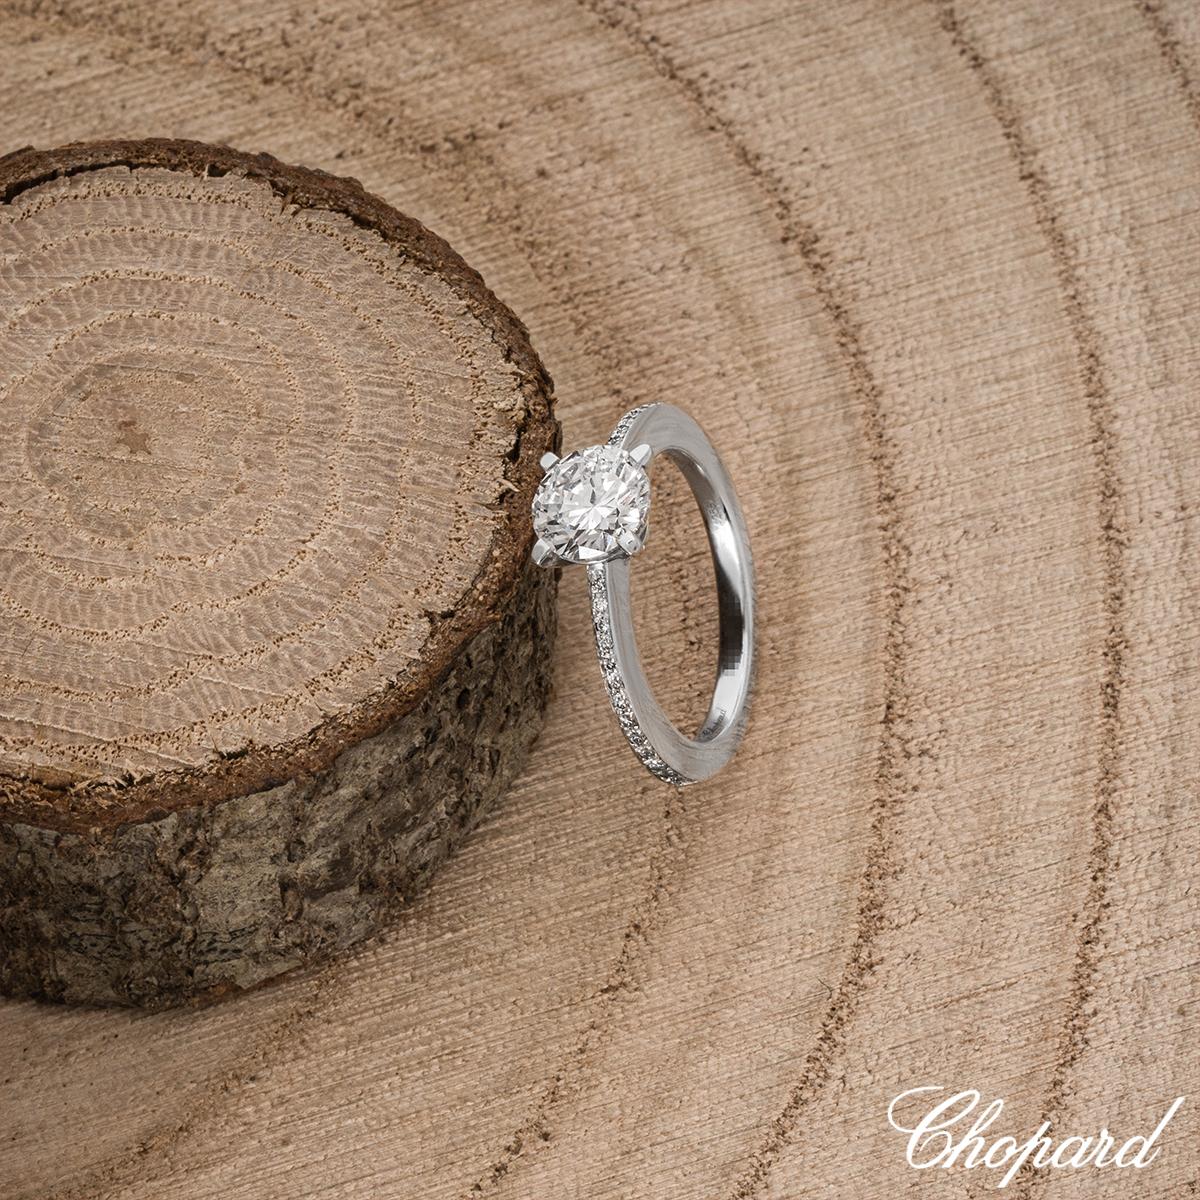 Chopard White Gold Diamond Ring 1.01ct D/VS2 In Excellent Condition For Sale In London, GB